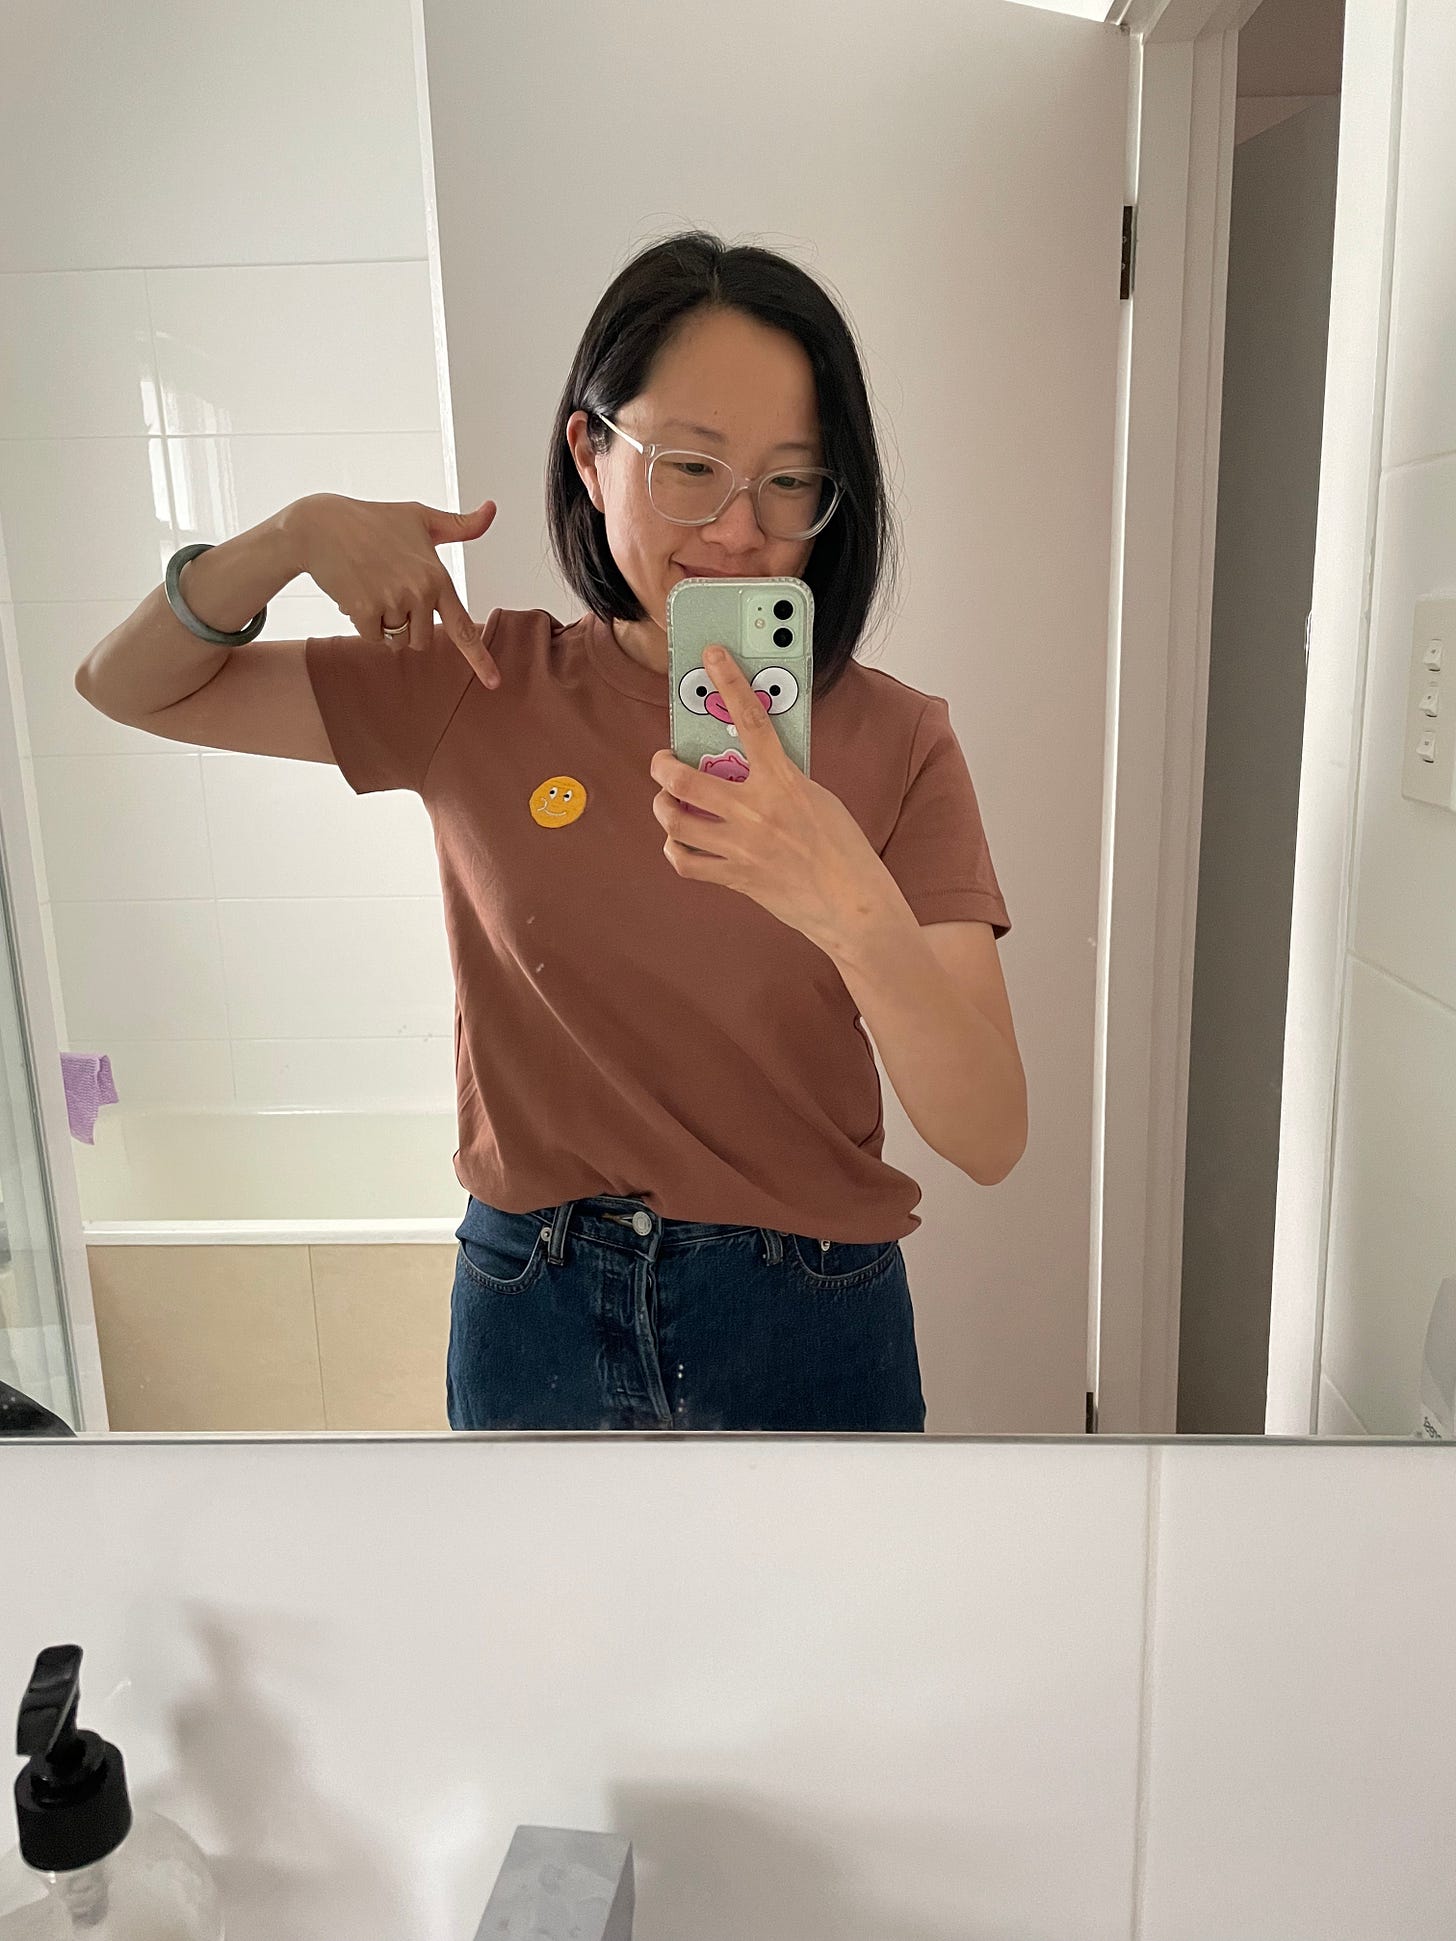 Selfie in bathroom mirror wearing a brown shirt with a hand embroidered chewing smiley face on it.